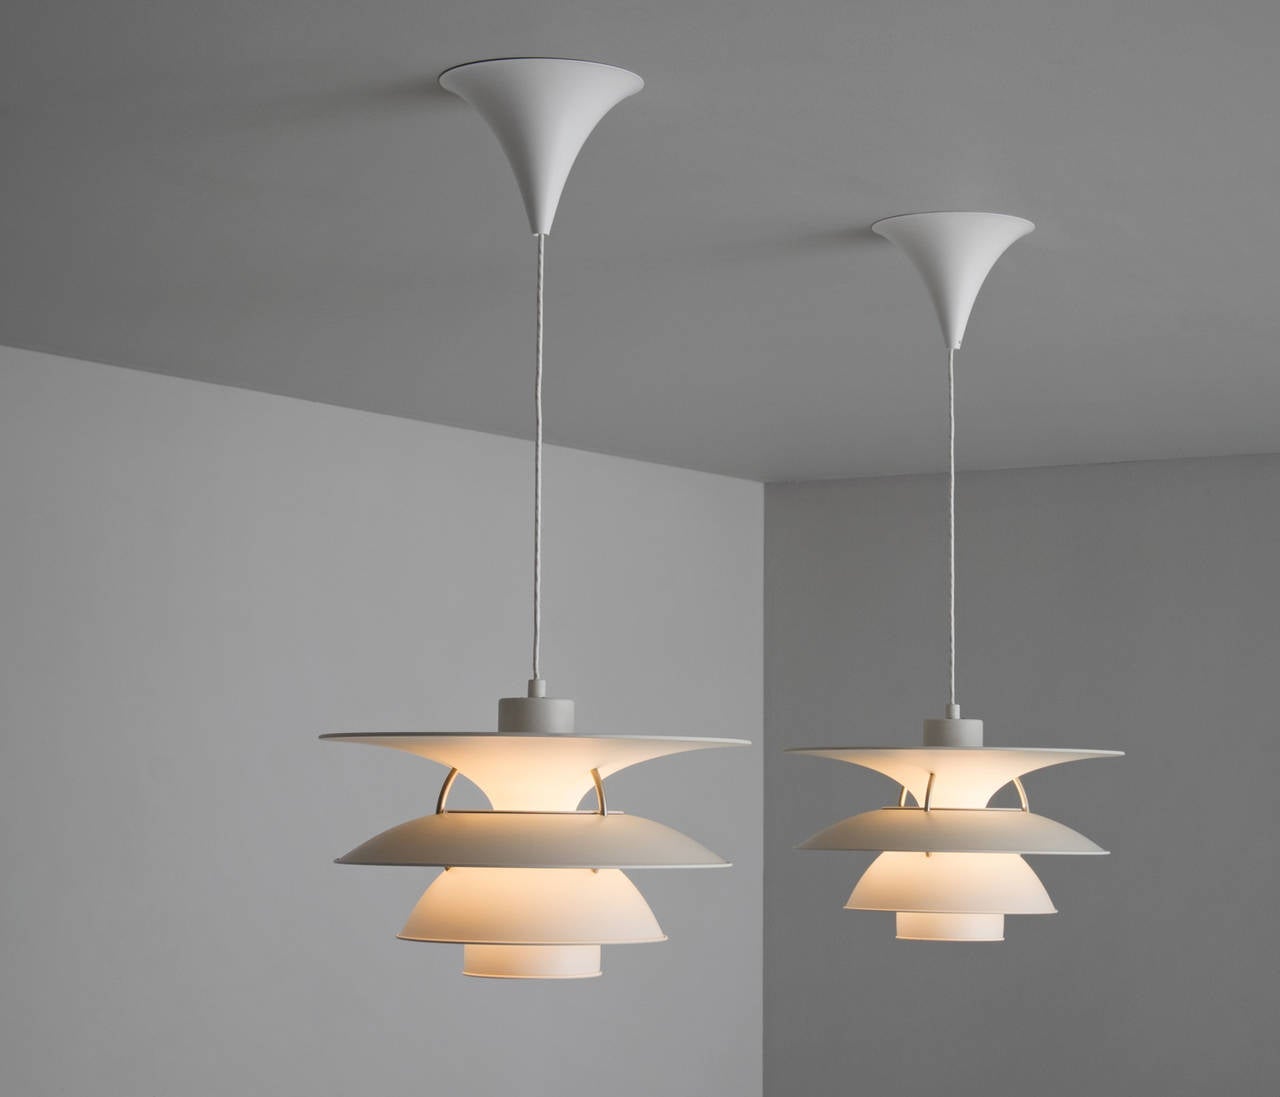 Set of two 'Charlottenburg' pendant lamps by Poul Henningsen for Louis Poulsen.

Four white metal shades mounted on three steel ribs.
The shades are designed for horizontal and vertical surfaces to indirectly illuminate a room. Provides a smooth,